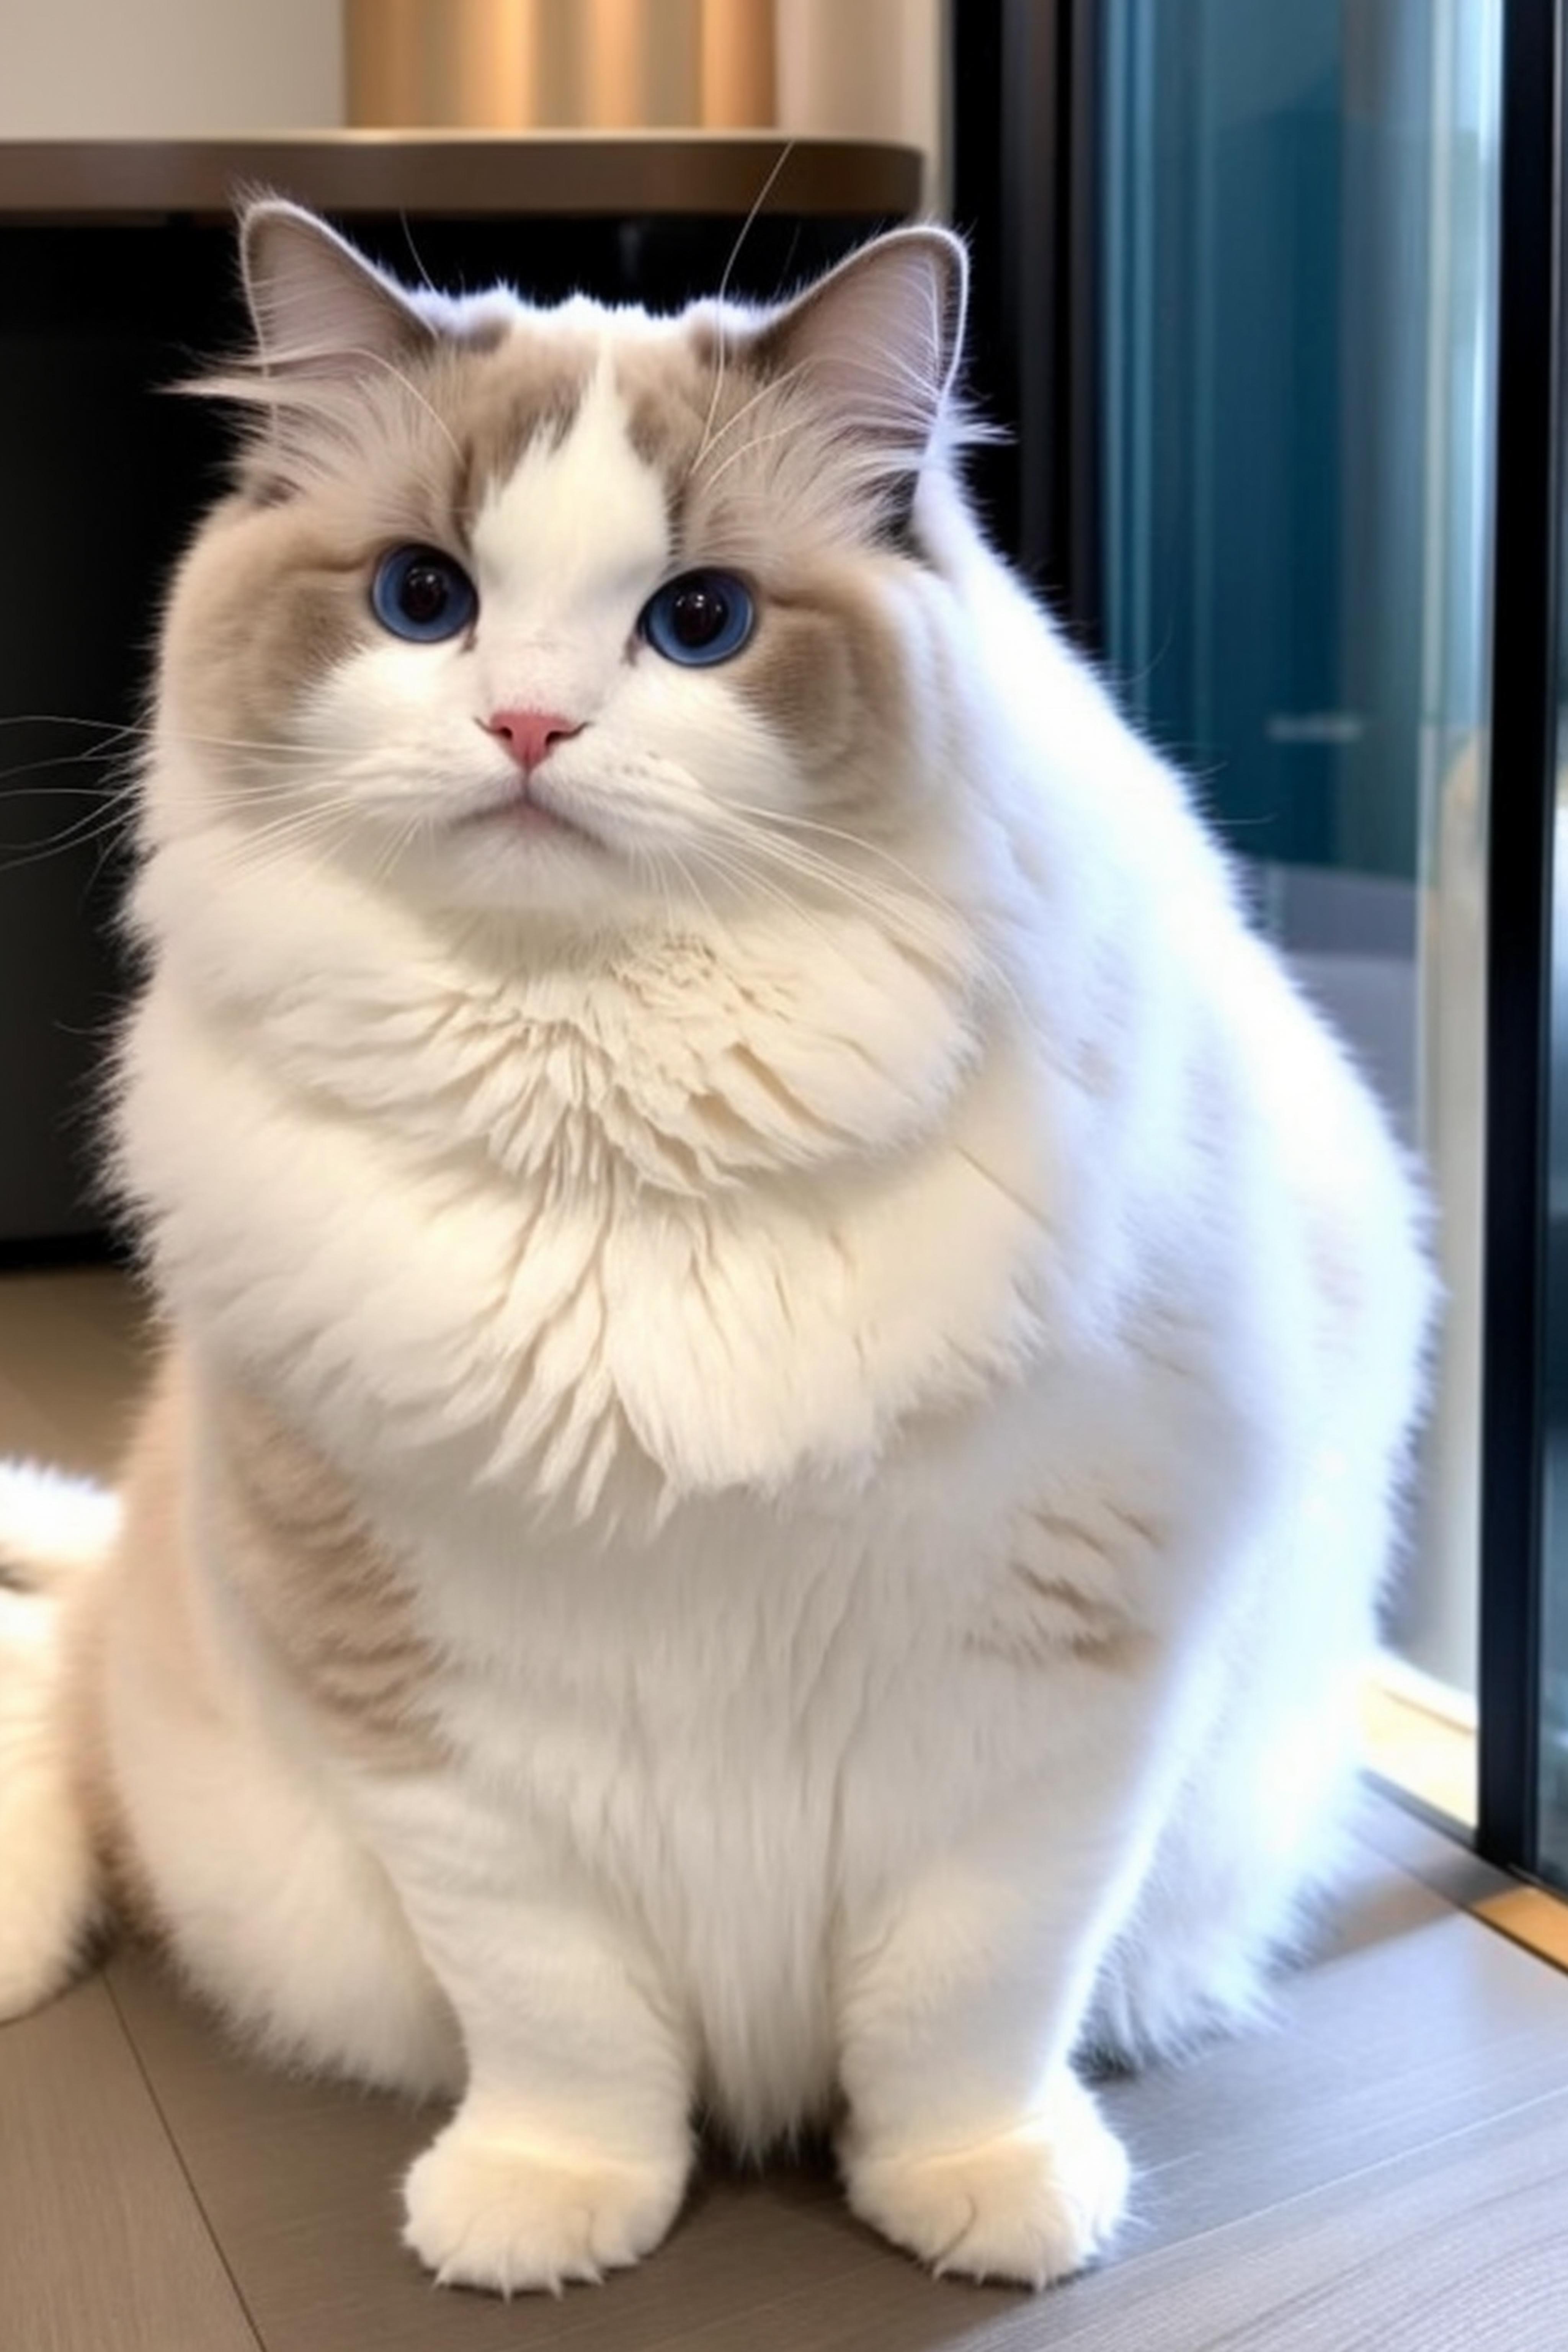 A large white cat with blue eyes sitting by a window.